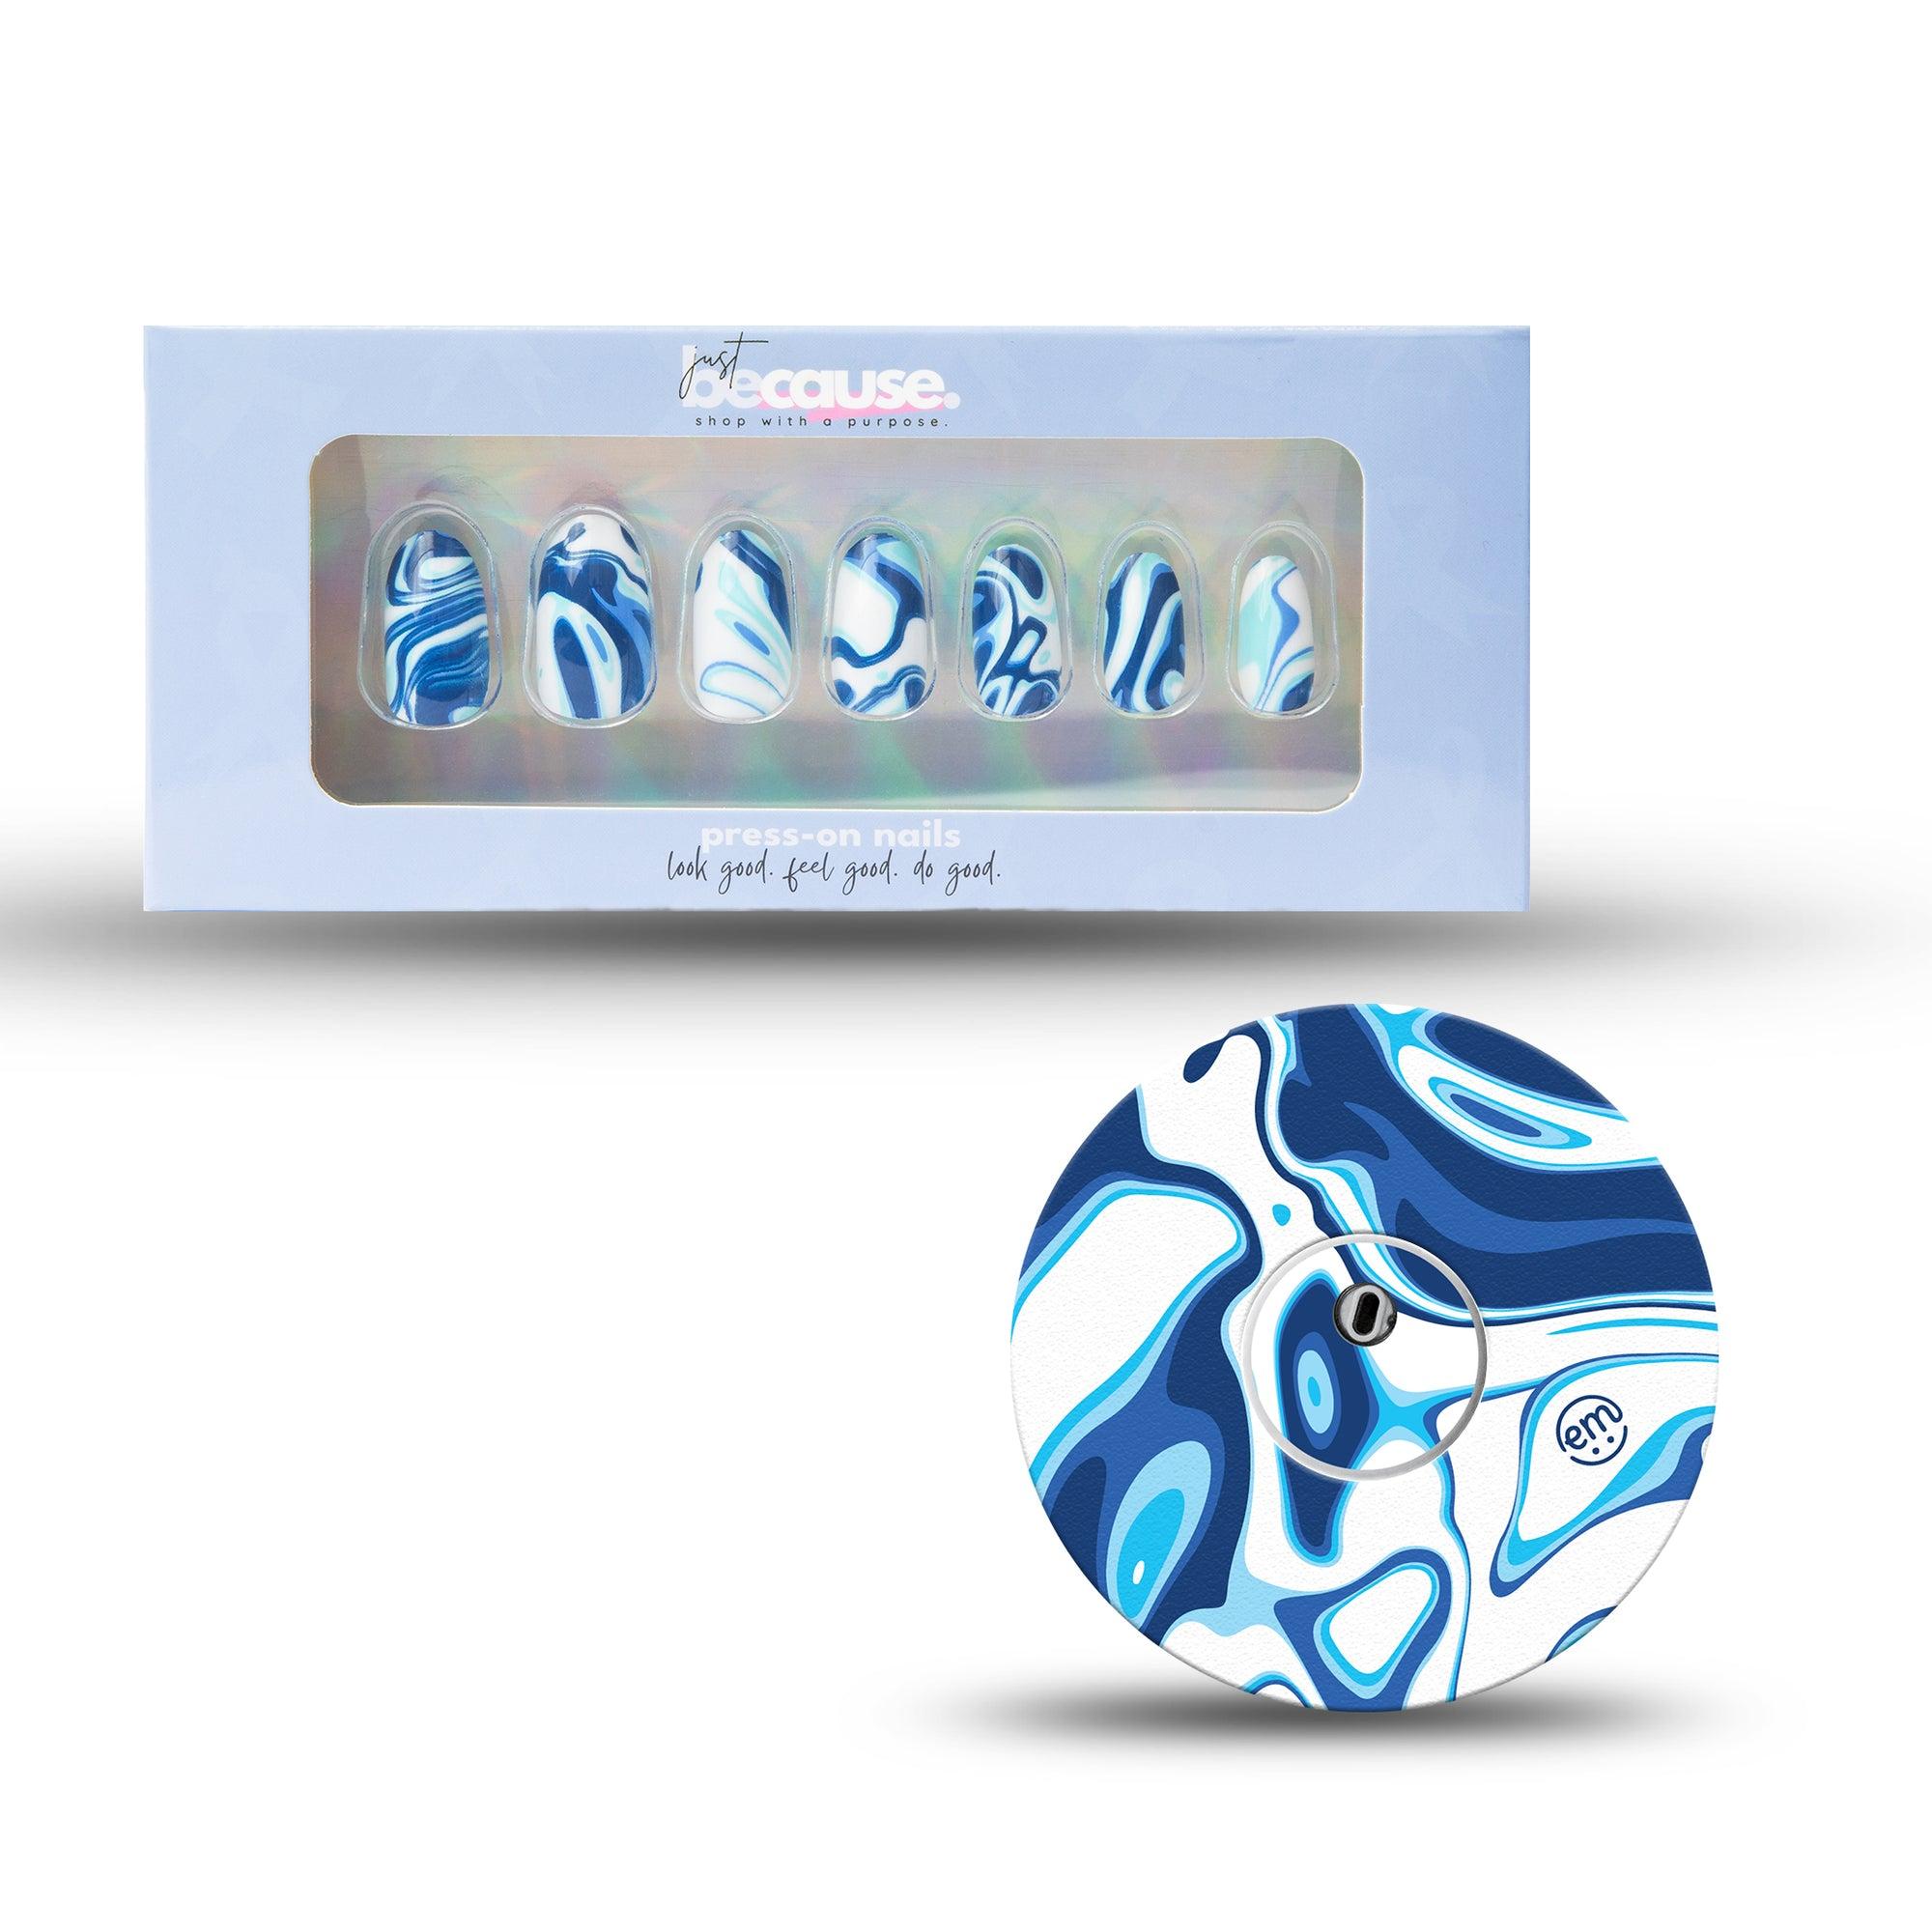 Just BeCause 24 Pcs ABS Press on nails Medium, Blue and white marble Fake Nails set with matching Blue and white marble Libre 3 Overlay Patch and Center Sticker, Support T1D - ExpressionMed.com	